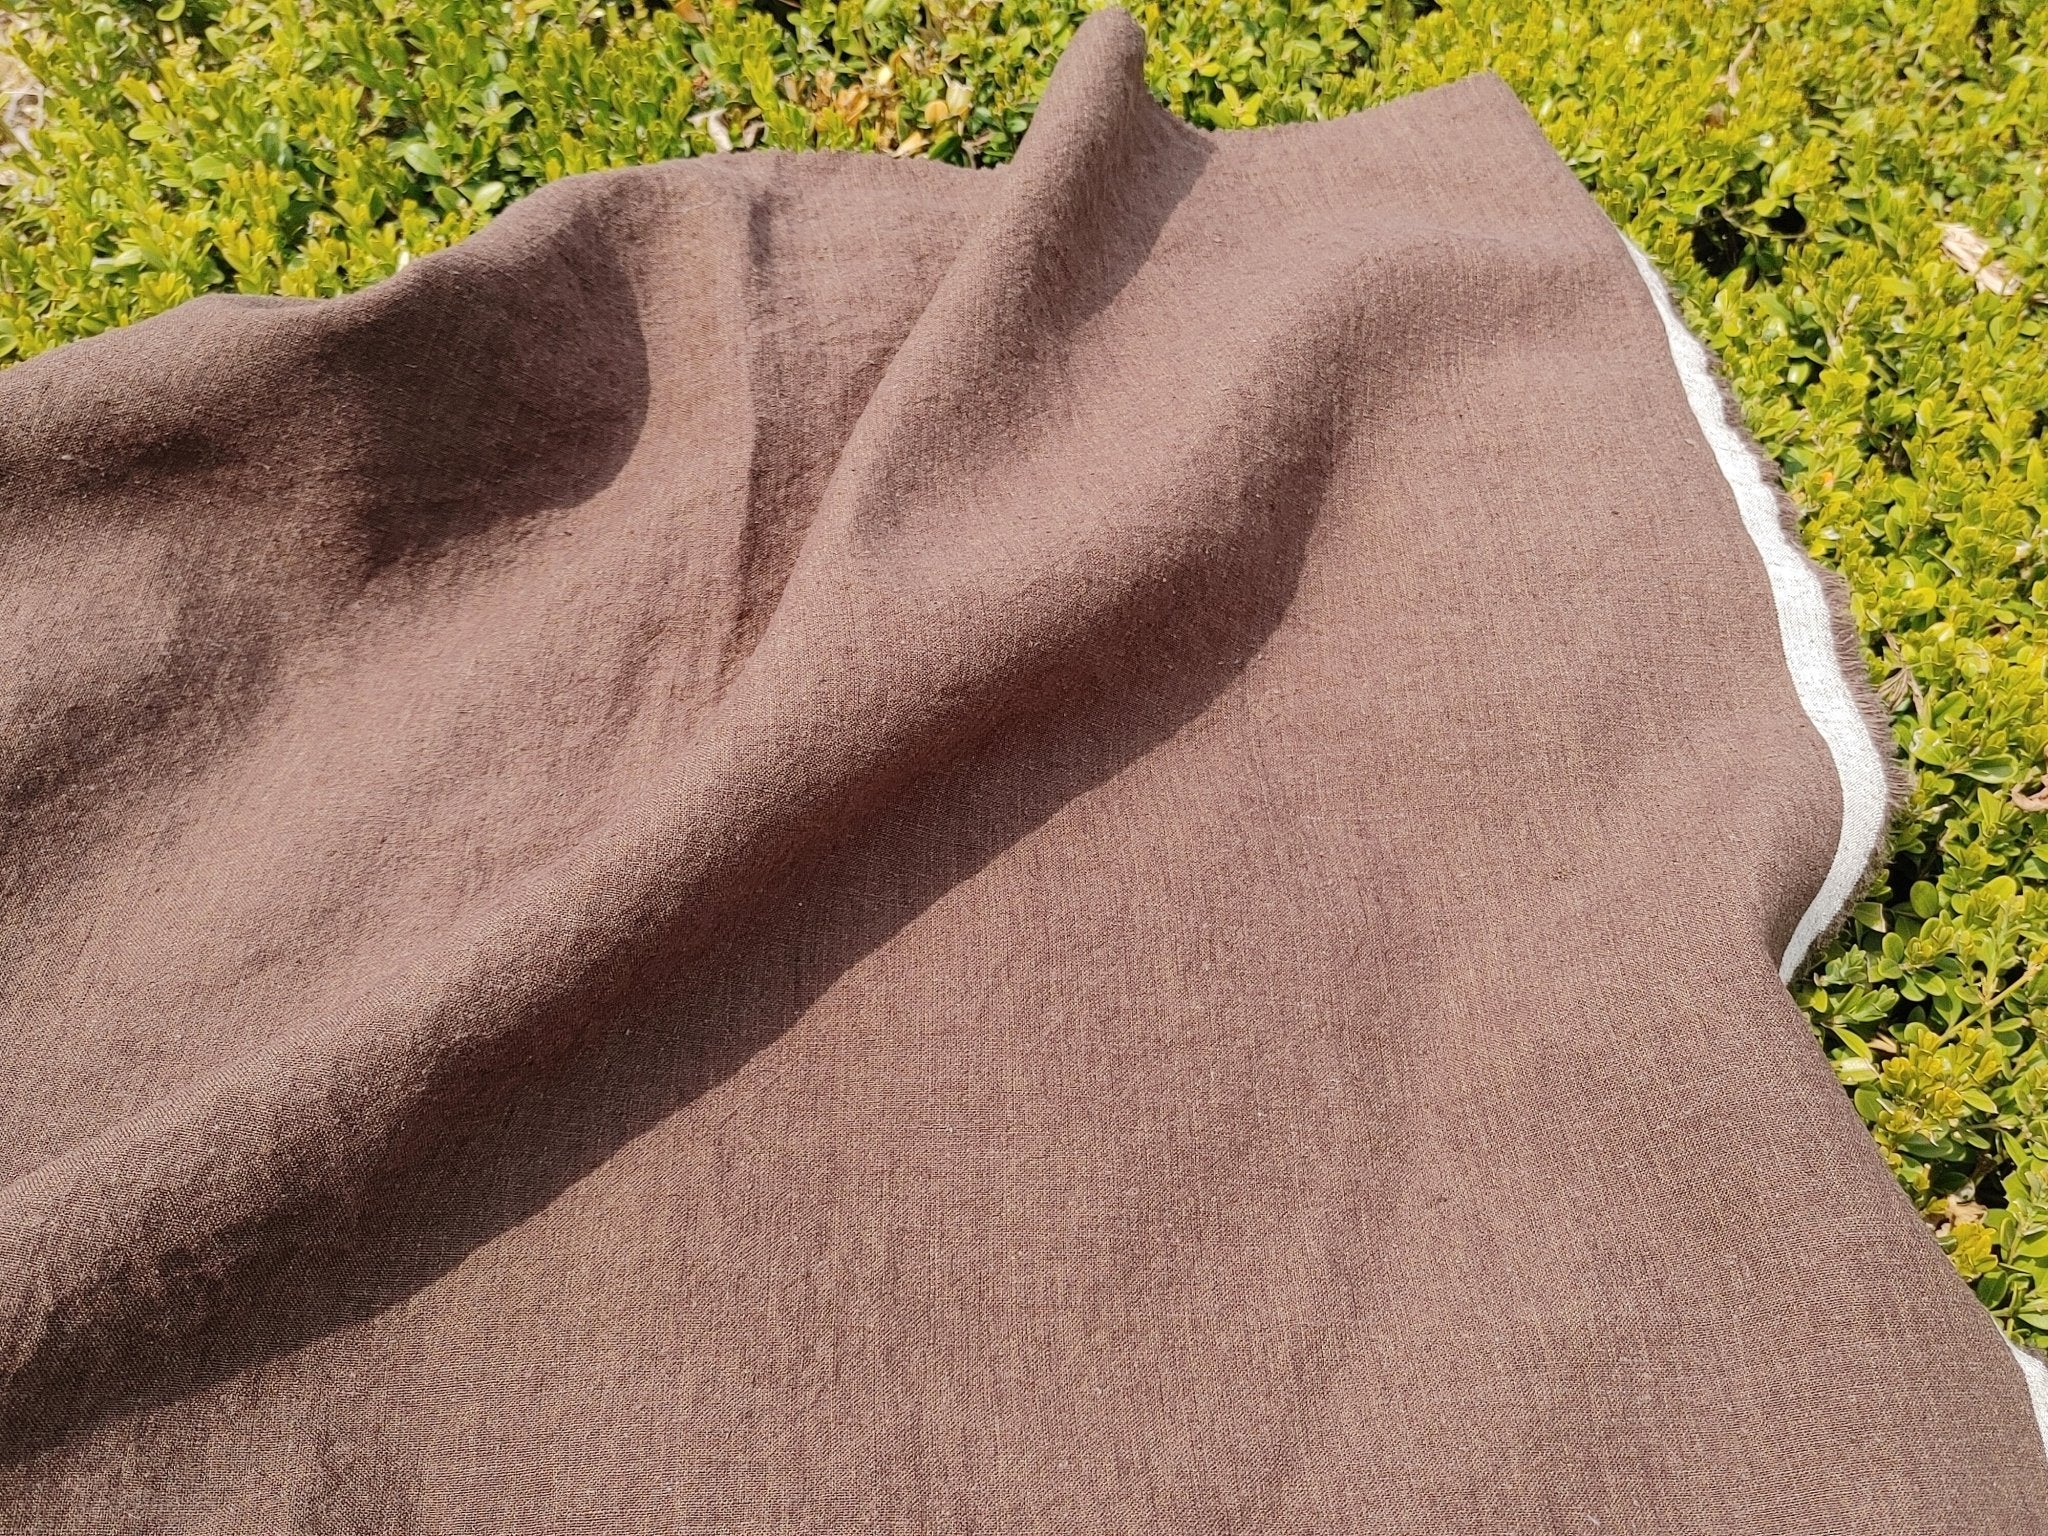 Vintage Dyed Medium Weight Linen Ramie Cotton Fabric with Plain Weave 7820 7771 7770 7819 7818 - The Linen Lab - Brown